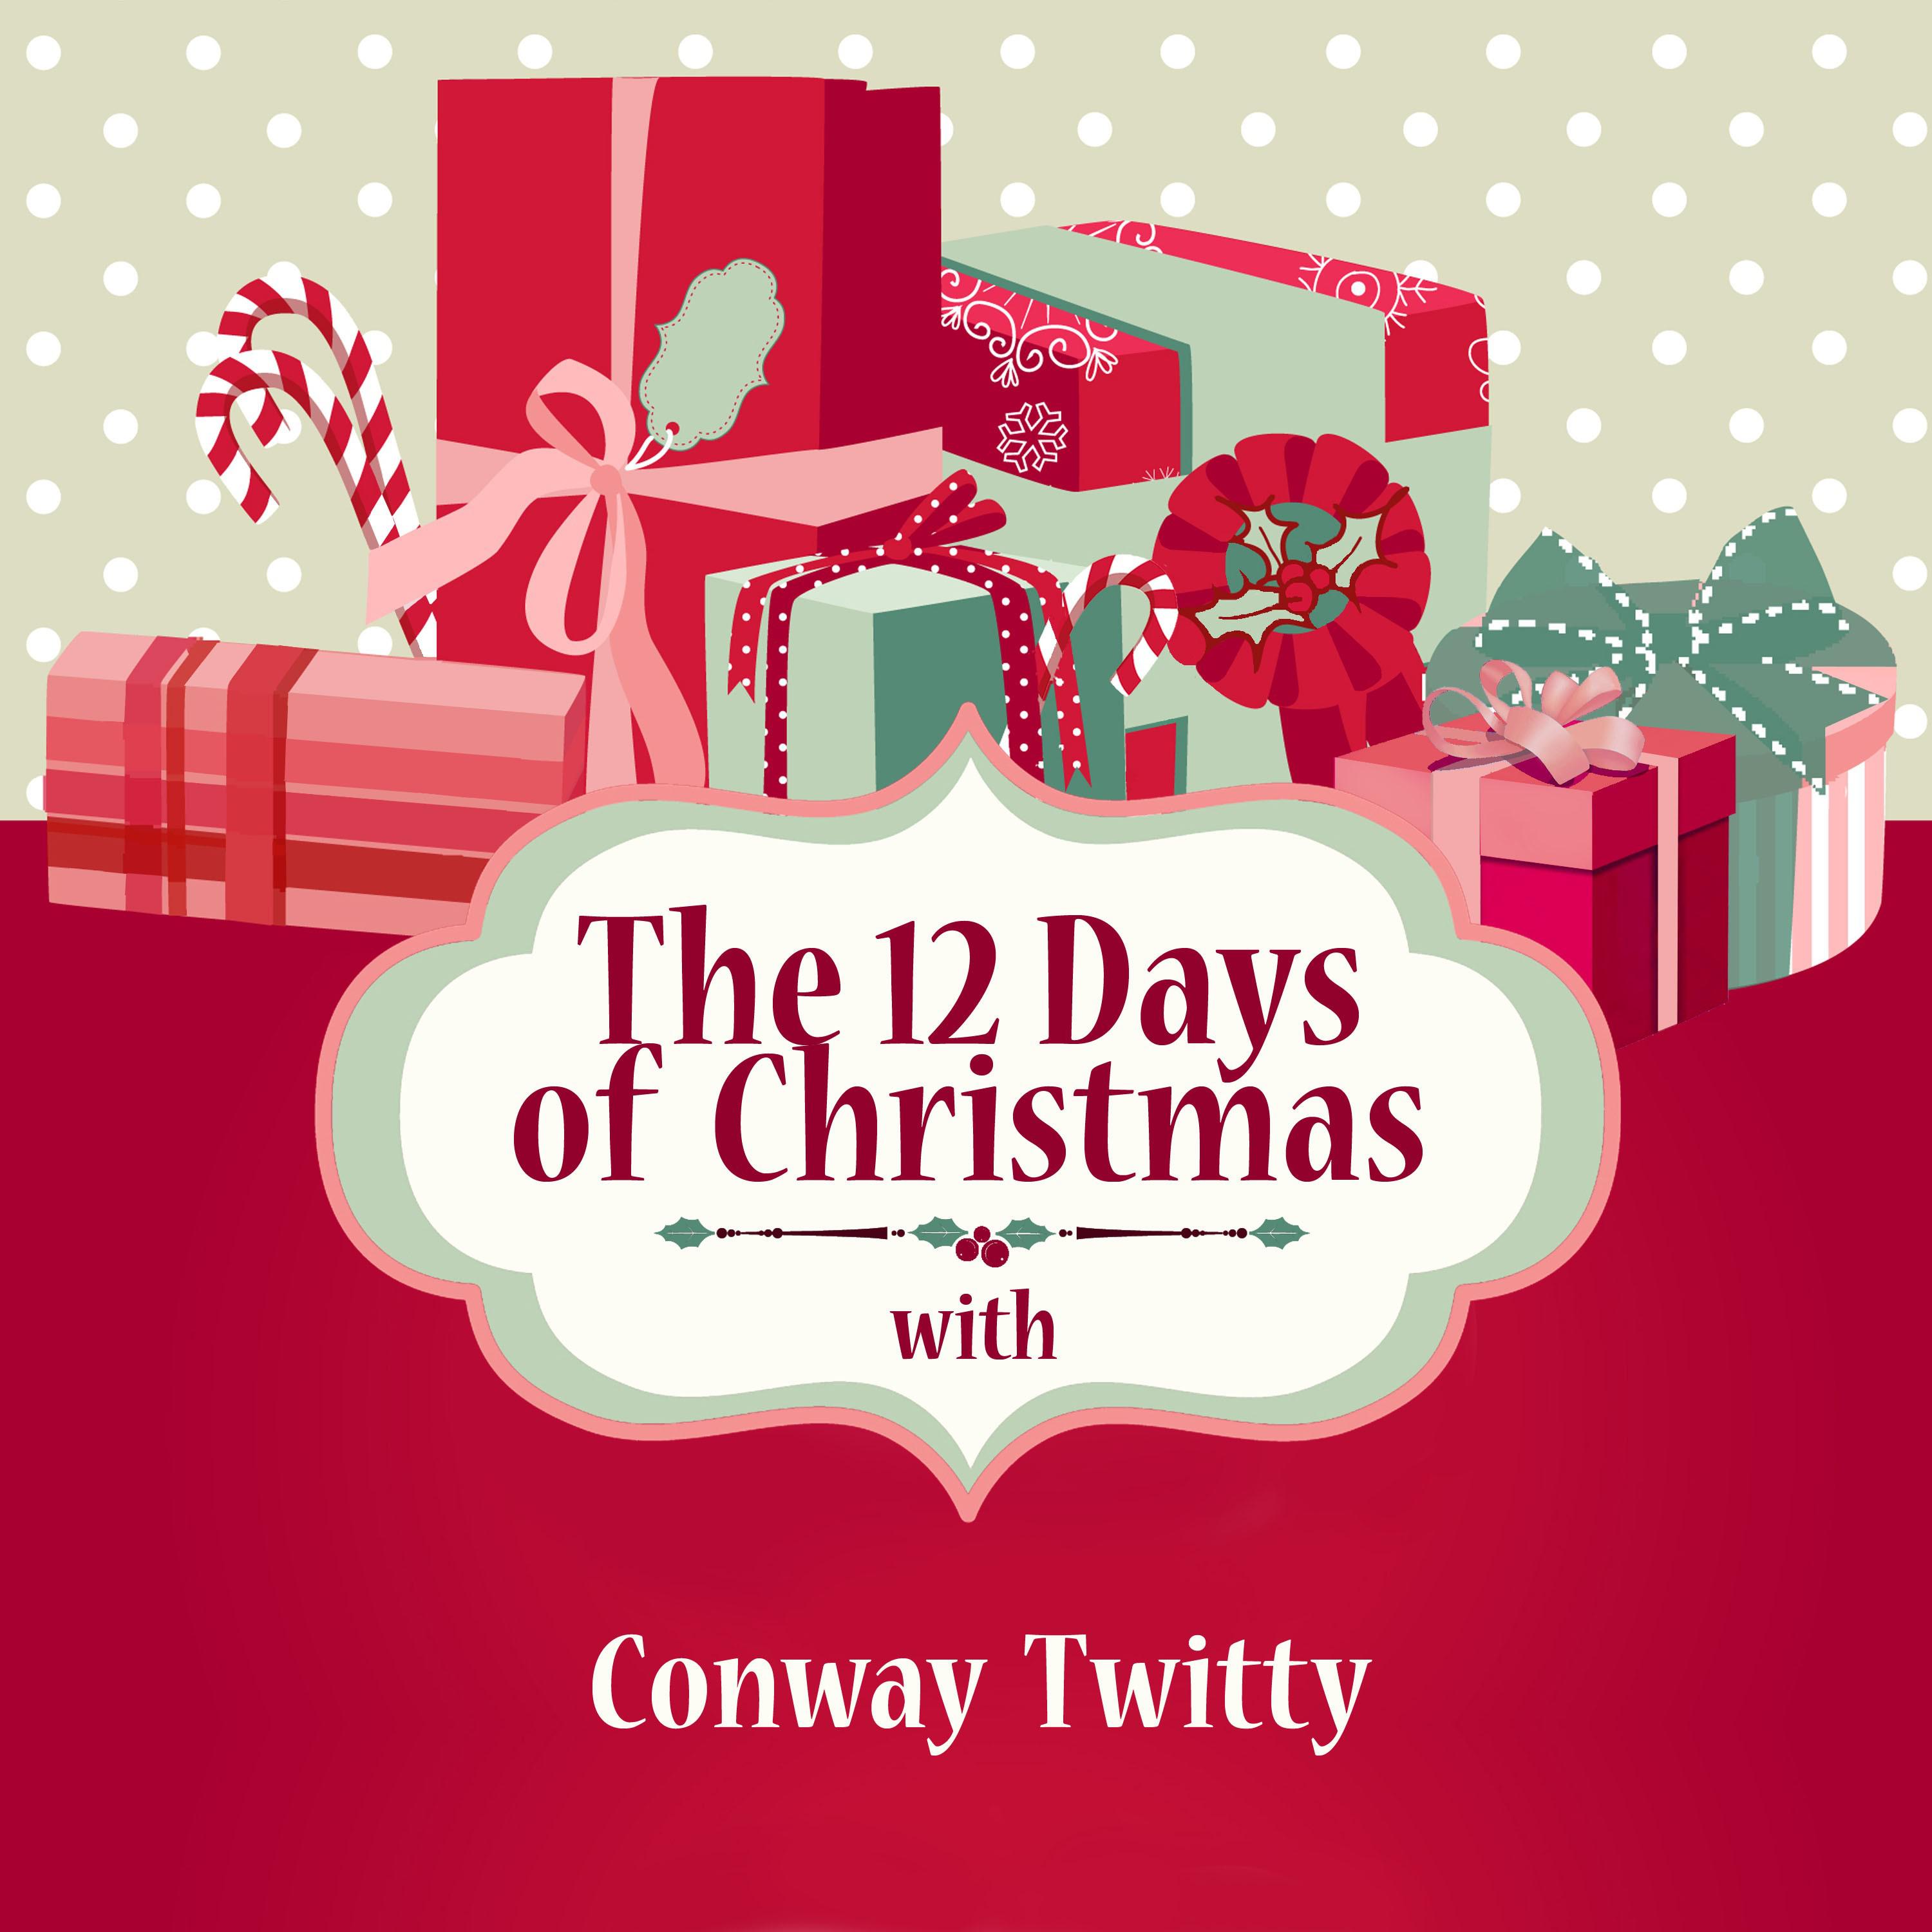 The 12 Days of Christmas with Conway Twitty